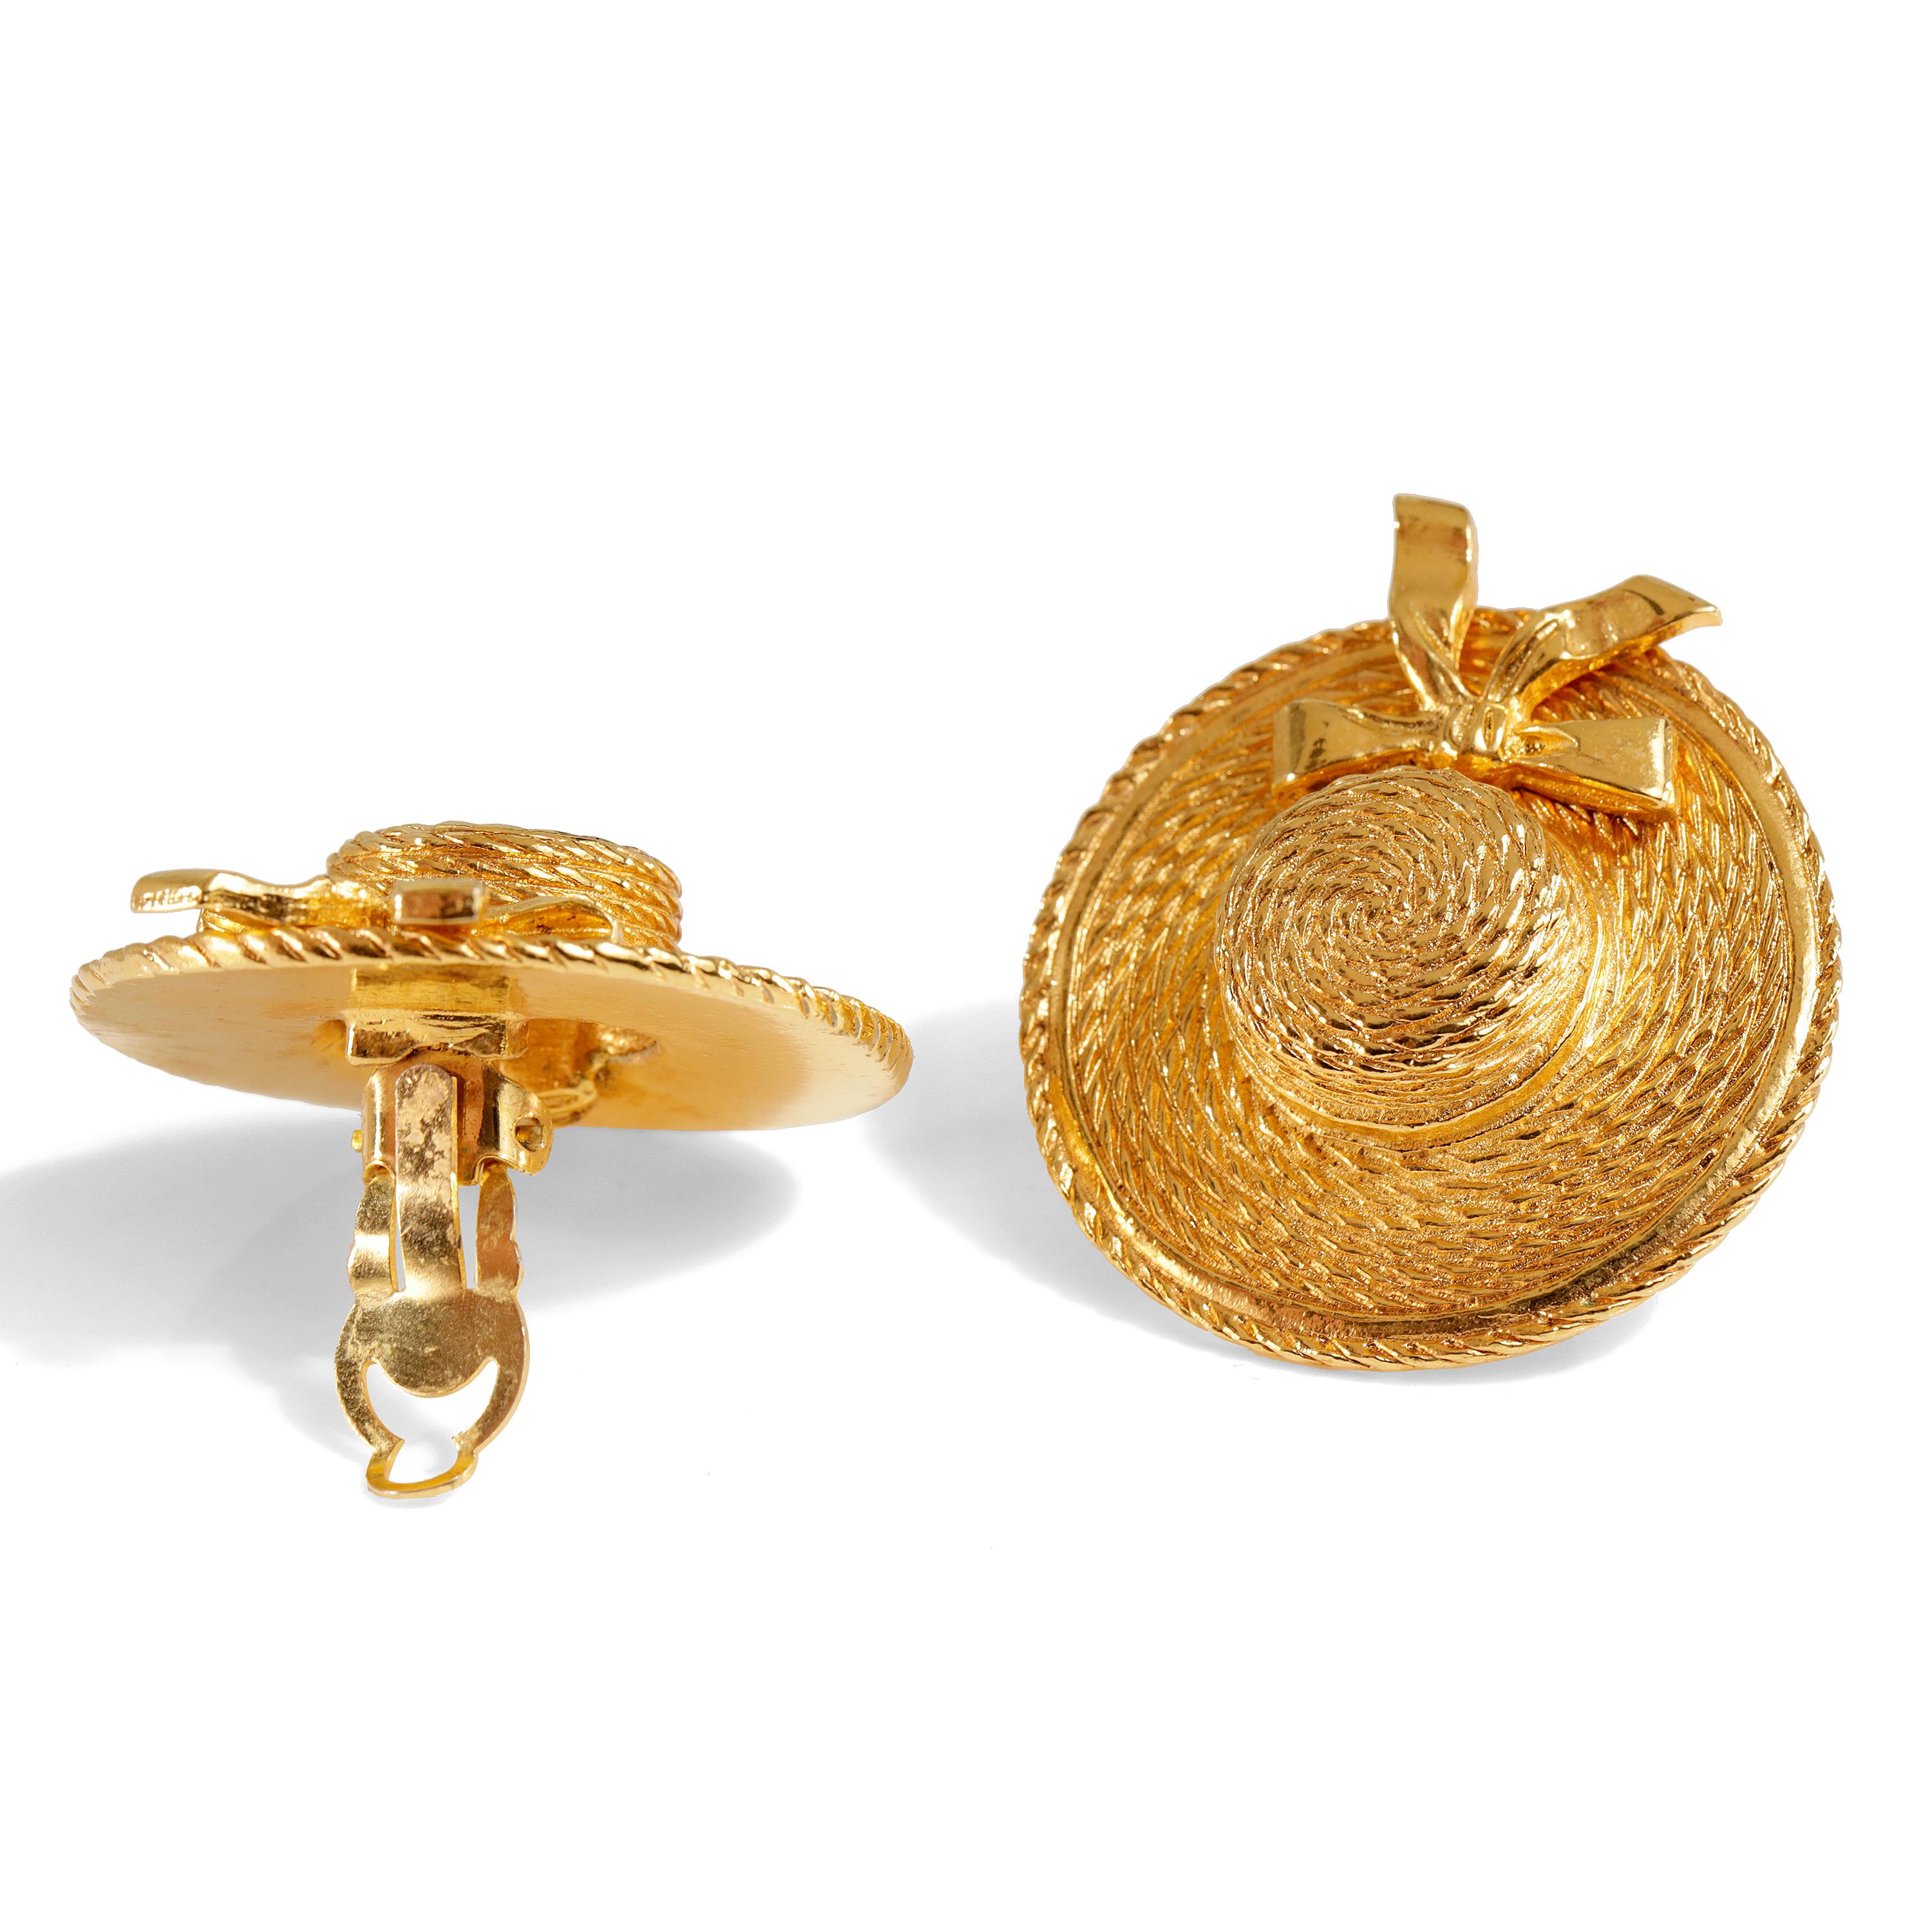 These authentic Chanel Gold Straw Hat Earrings are in excellent condition, from the early 1980’s.   Gold textured straw hat with a decorative bow.  Clip on closure. Made in France.
